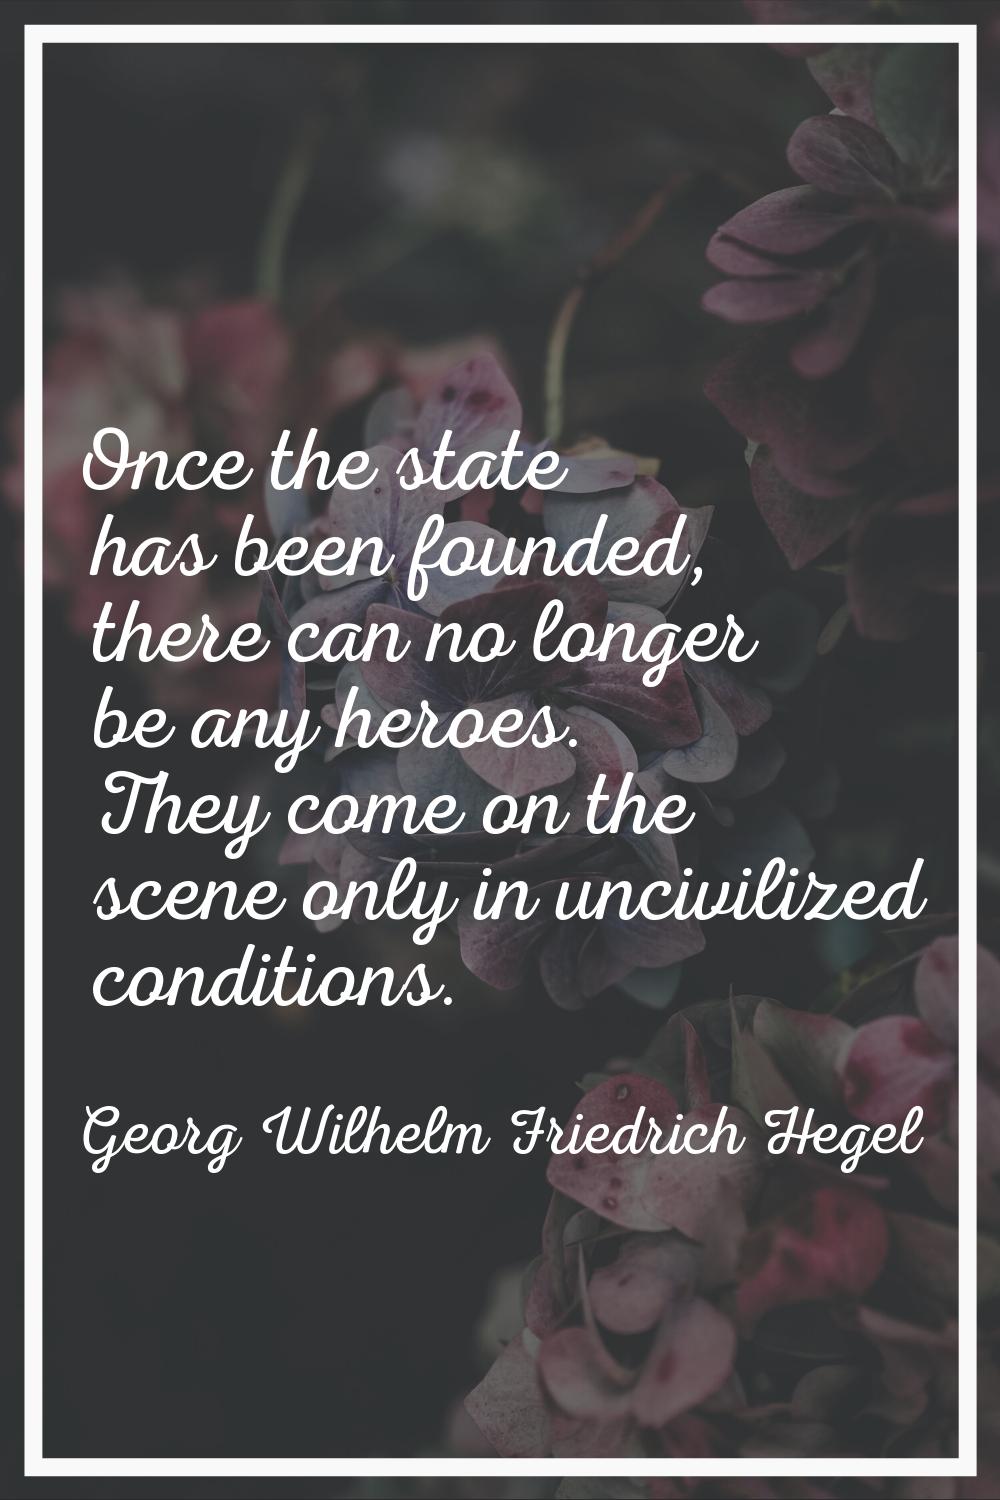 Once the state has been founded, there can no longer be any heroes. They come on the scene only in 